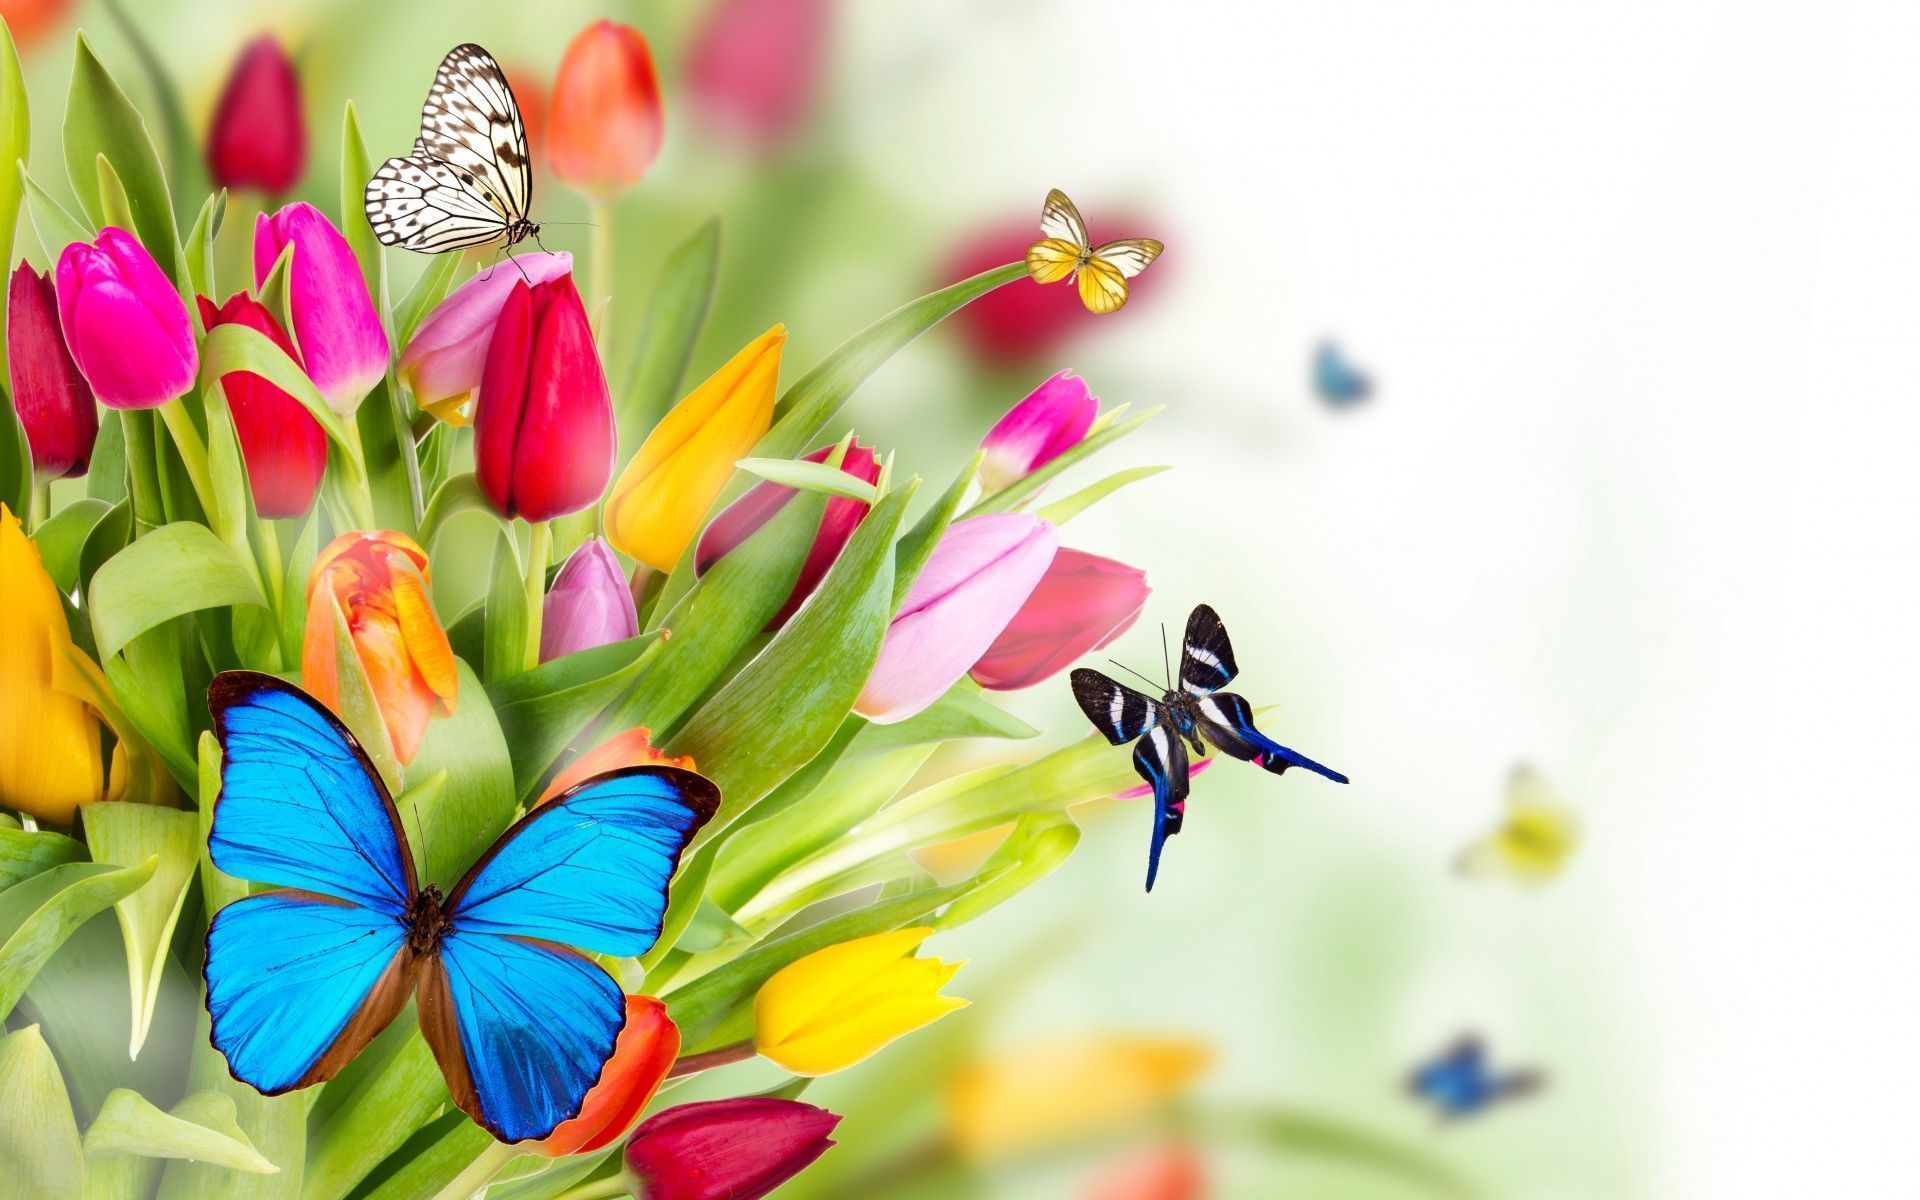 Spring Flowers Wallpapers Group (75+)